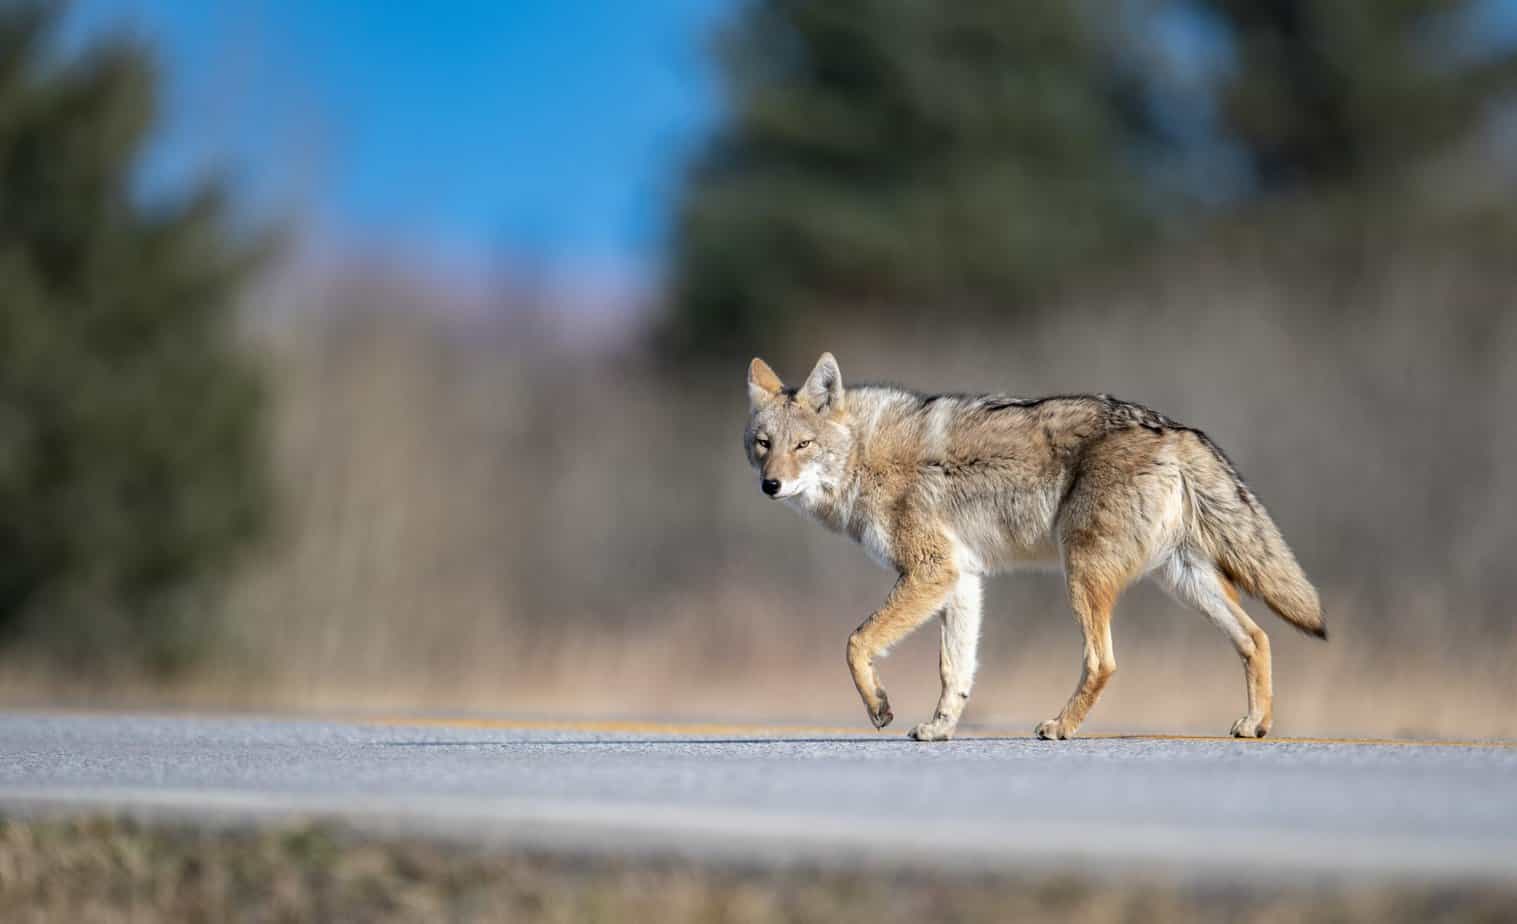 Coyotes are common to see around Vancouver. They normally come out at night.